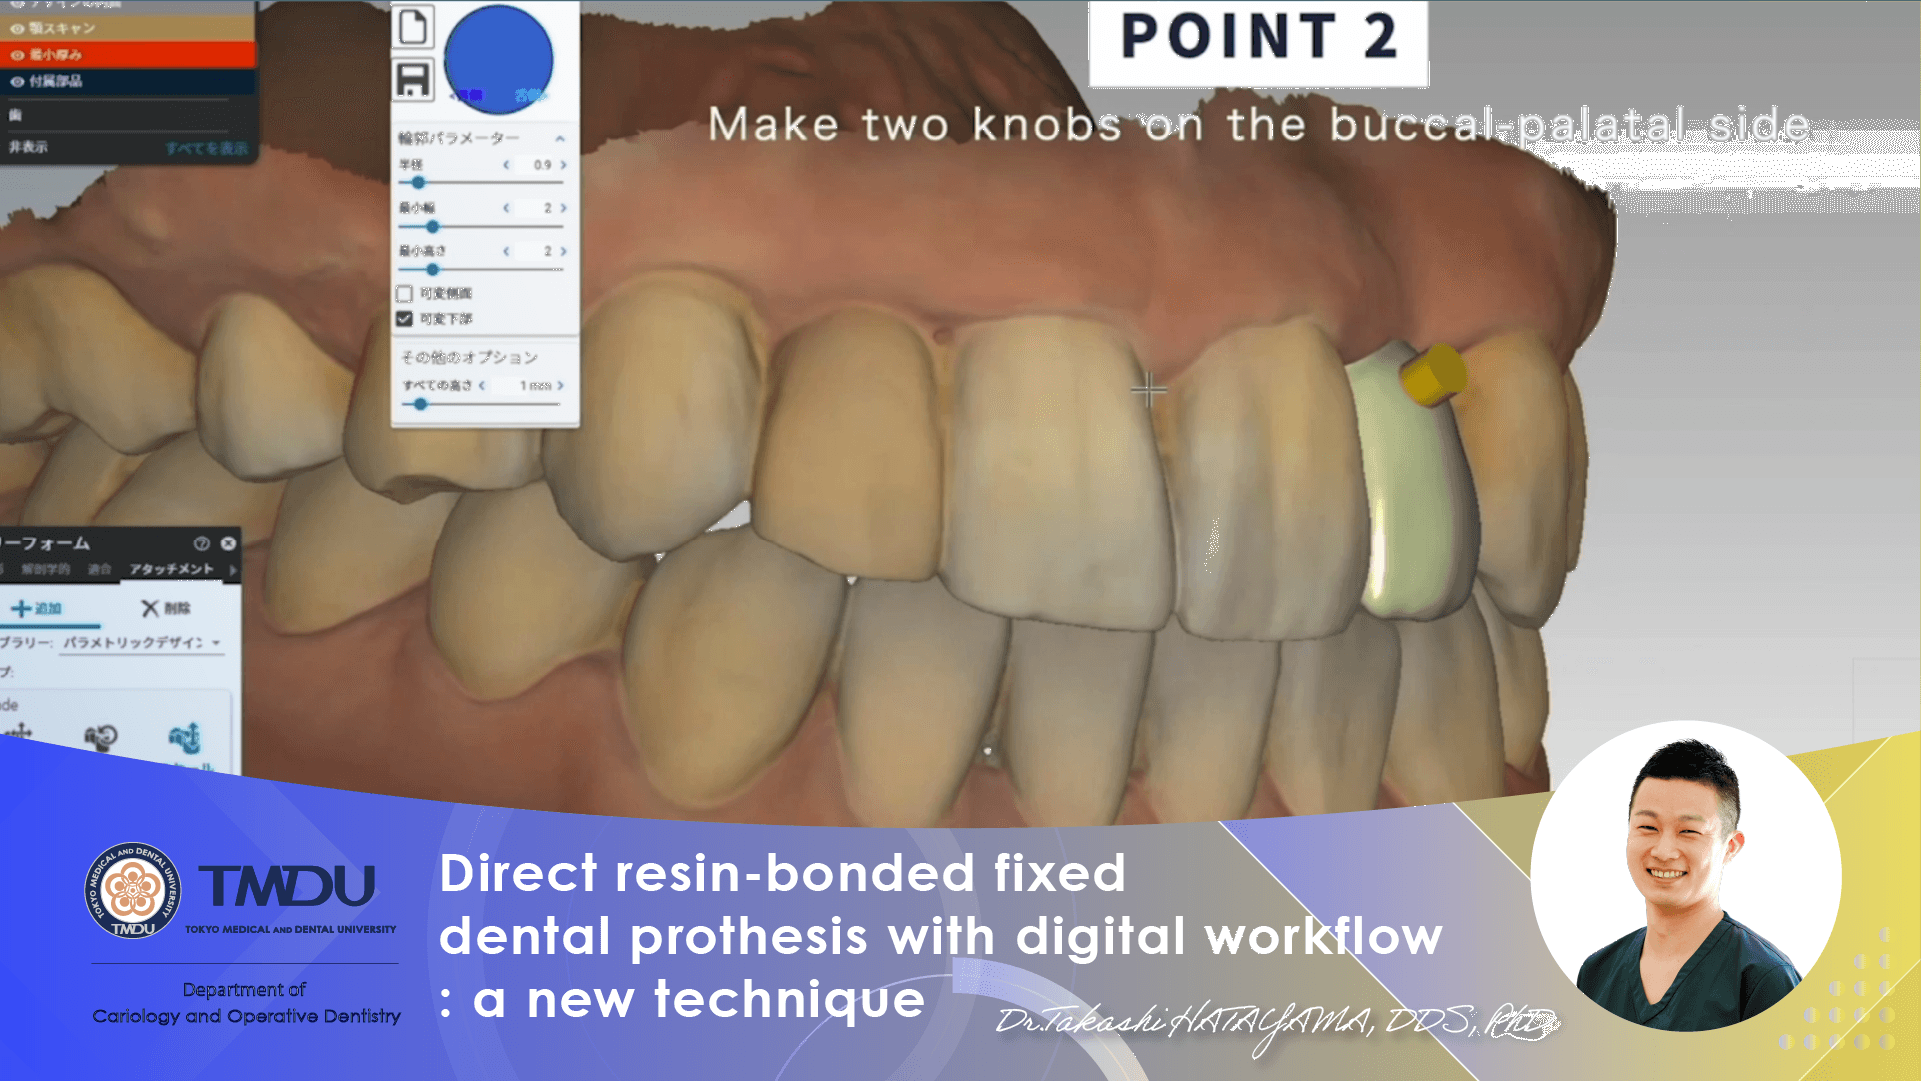 Direct resin-bonded fixed dental prothesis with digital workflow: a new technique